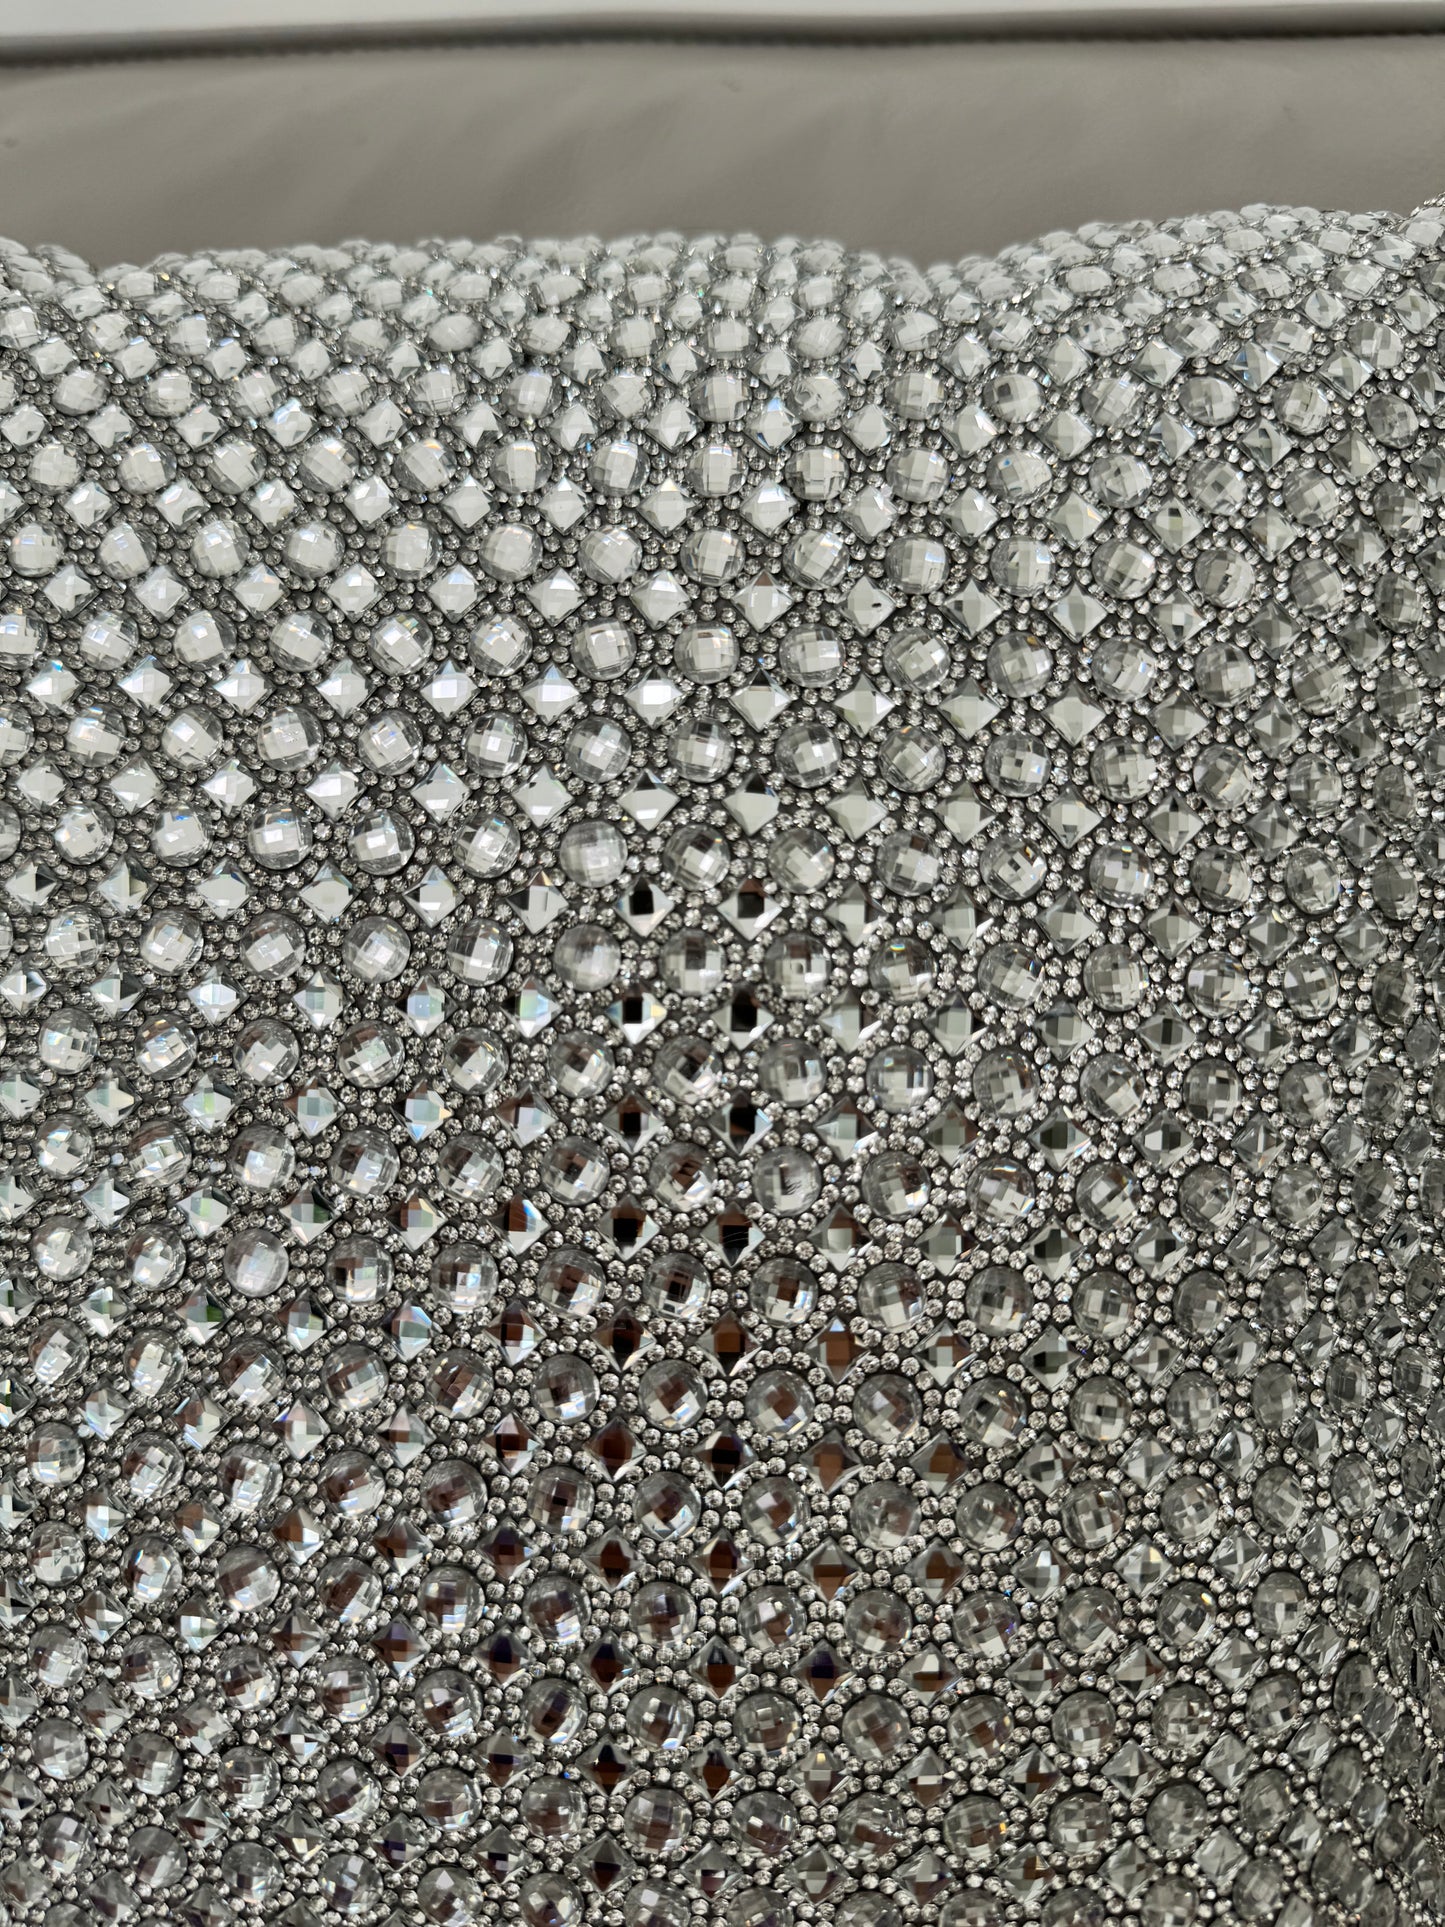 Sparkles Home Rhinestone 16x16 Montaigne Jeweled Gray Crystal Crystals Sparkle Silver Bling Luxury Decorative Decor Pillow